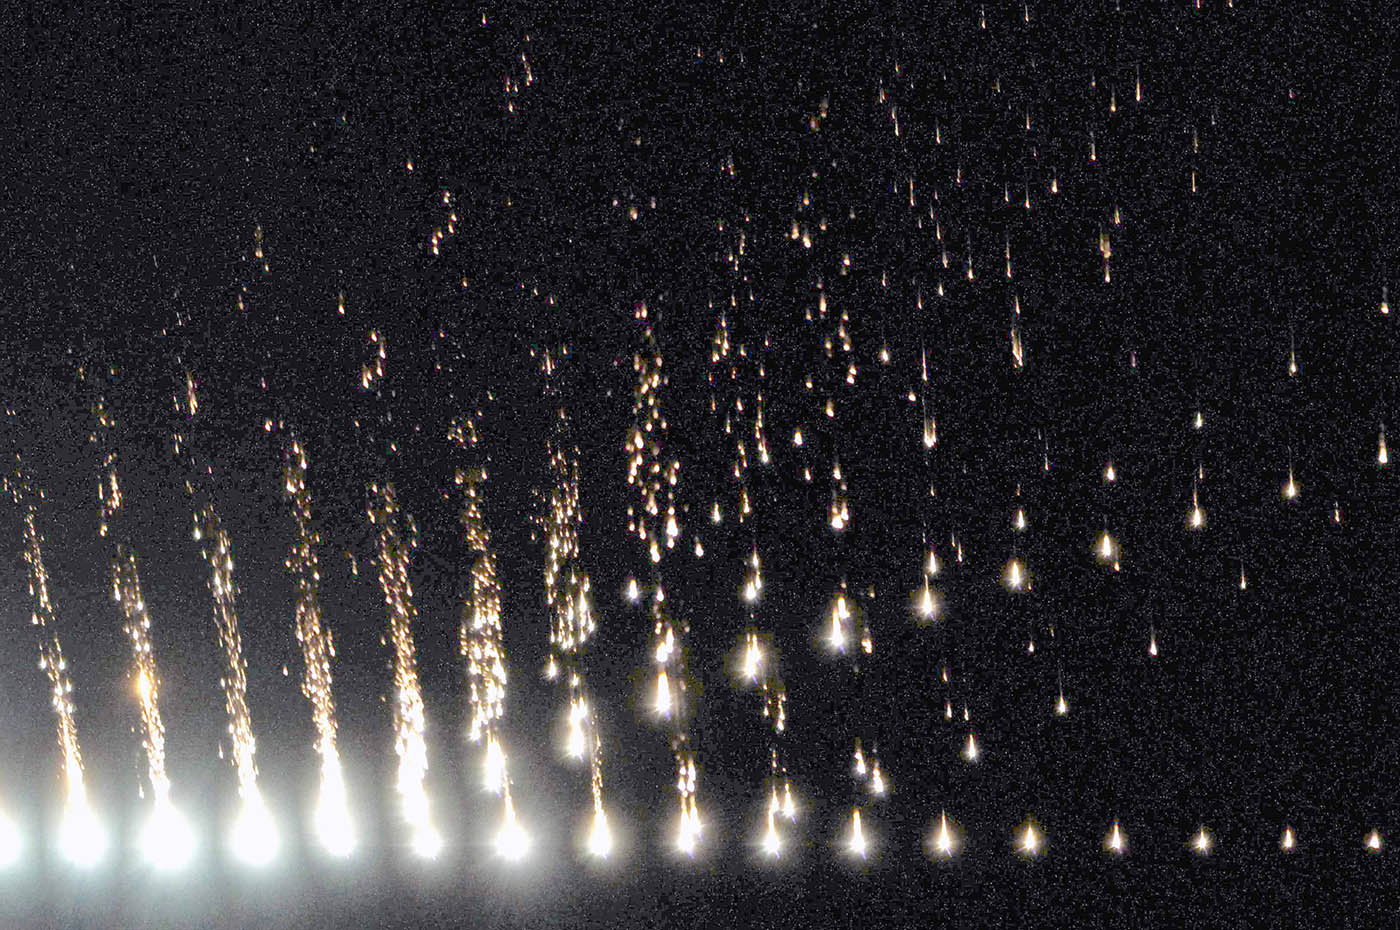 End of flight fragmentation of the Oct. 18, 2012, fireball over the San Francisco Bay Area